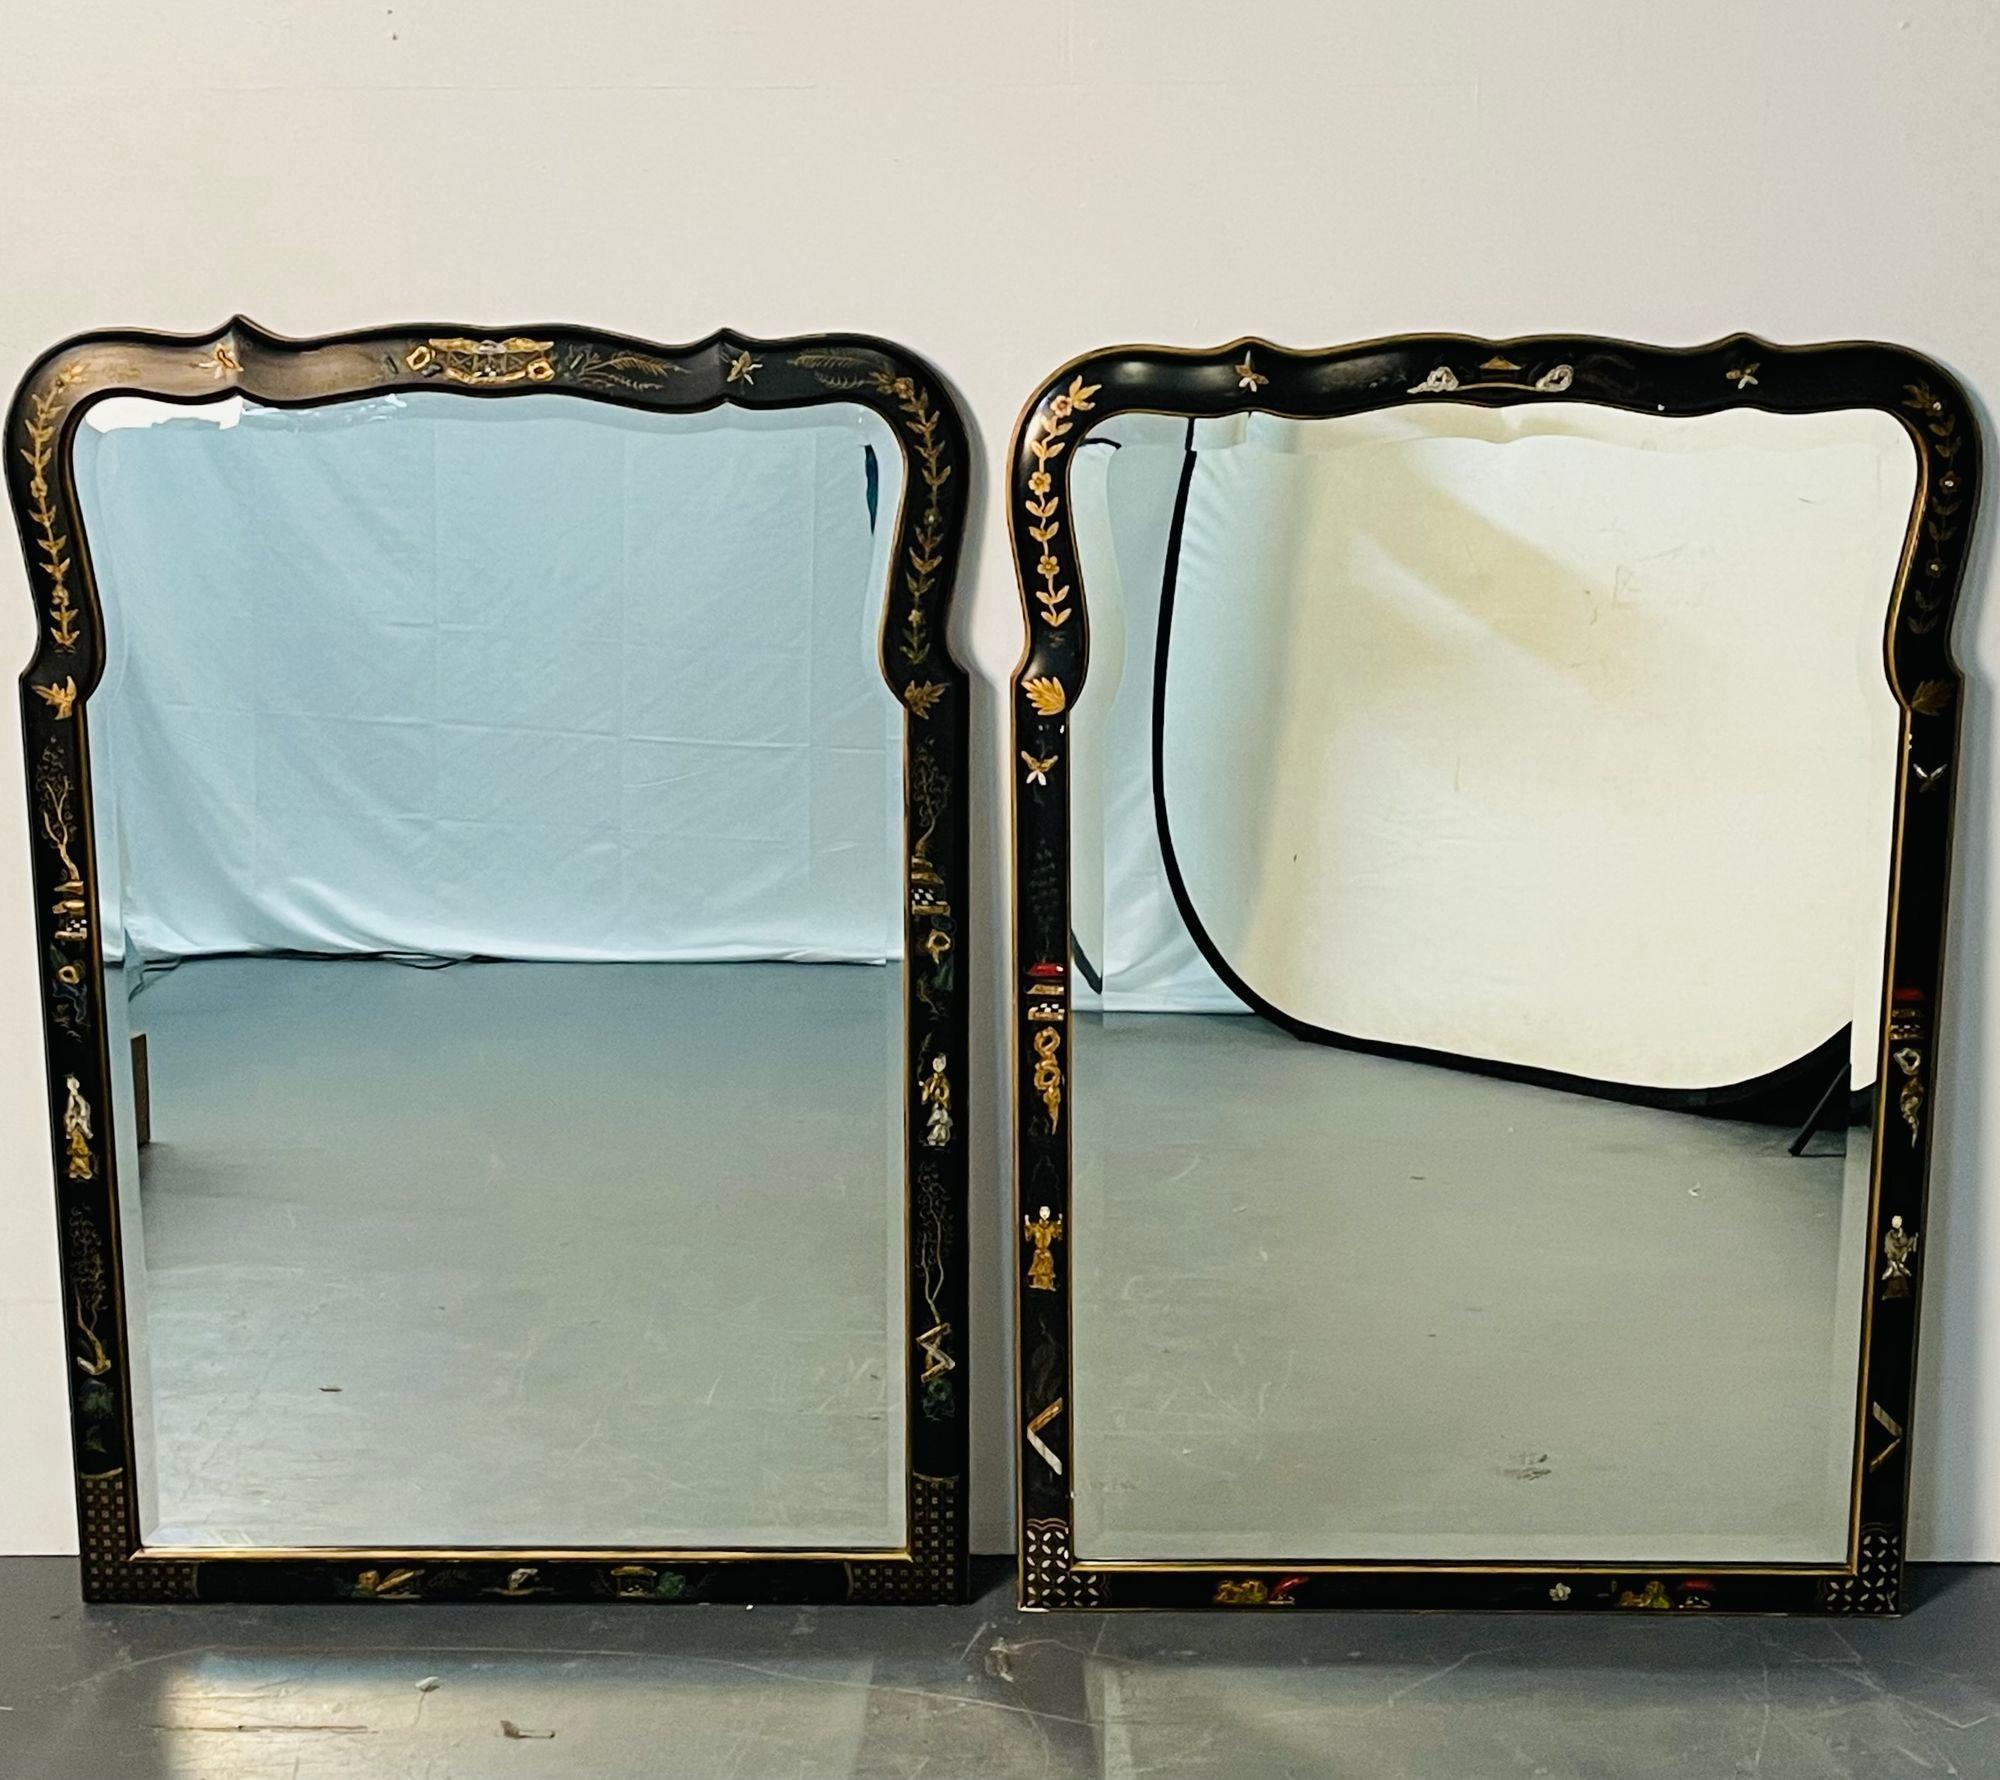 Pair of Chinoiserie wall / console / pier mirrors, ebony paint decorated
Pair of Chinoiserie ebony paint decorated wall / console / pier mirrors, giltwood. Each having a clear clean center mirror in a parcel gilt and ebony frame depicting